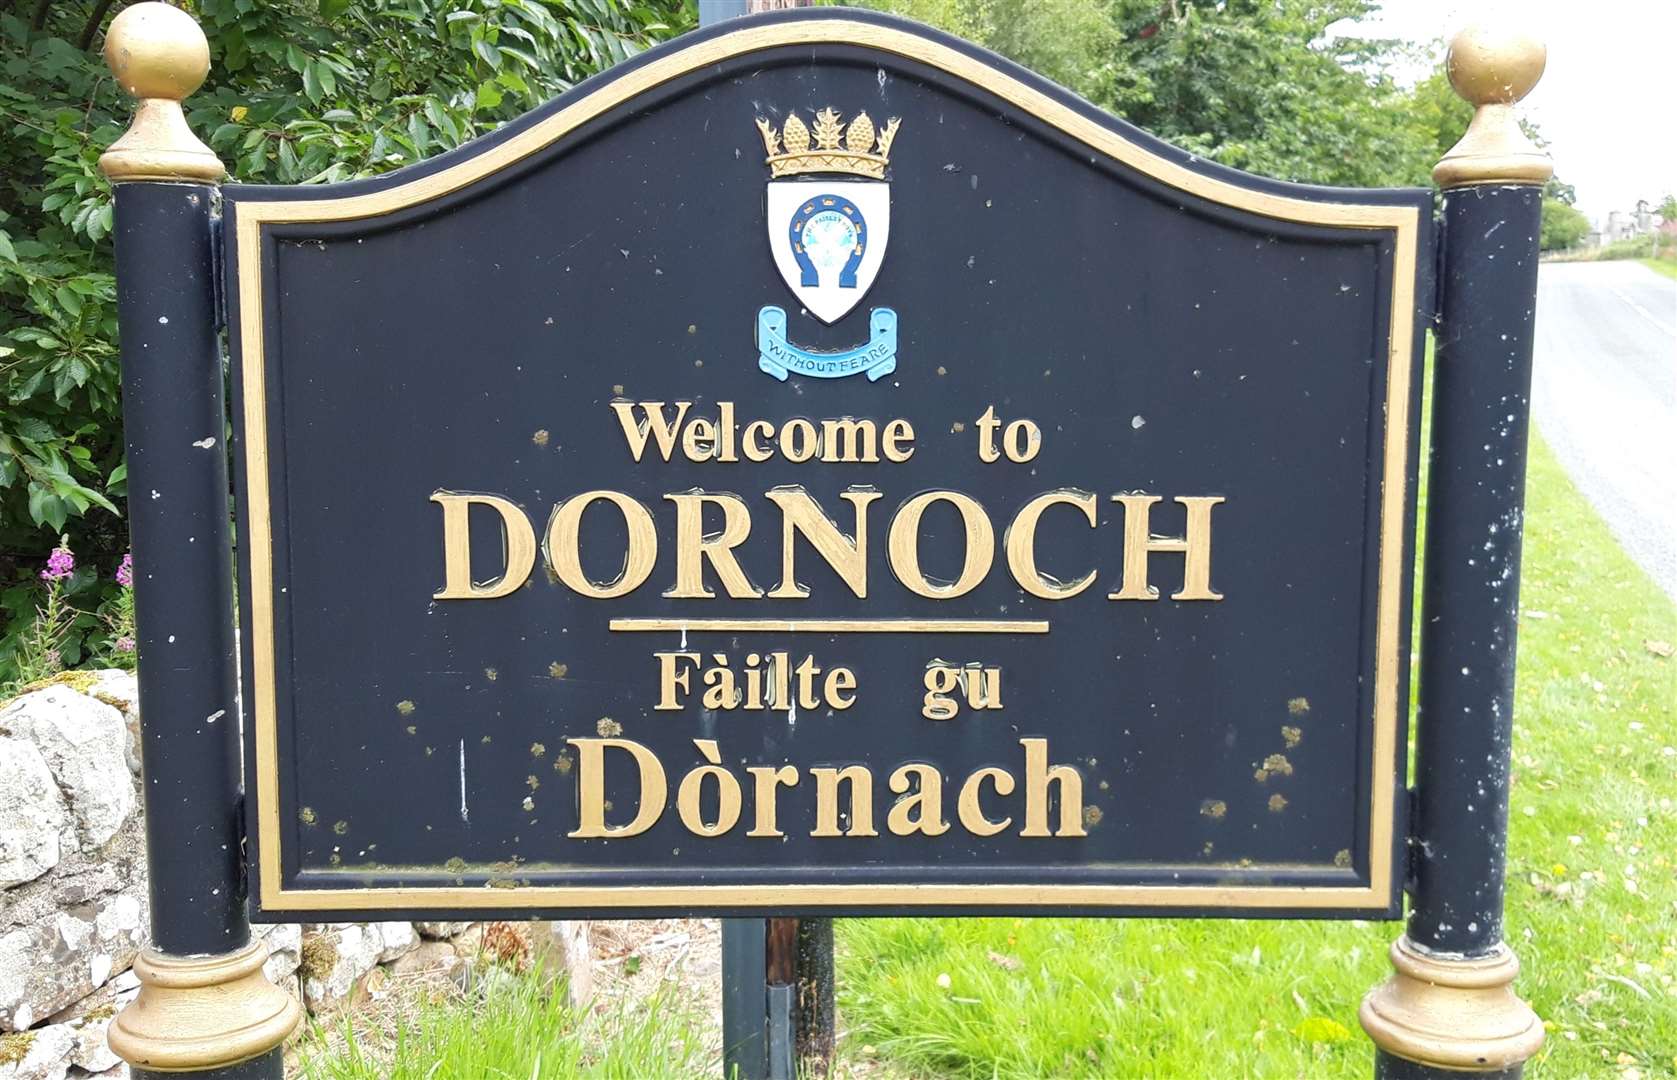 Dornoch is Sutherland's county town.